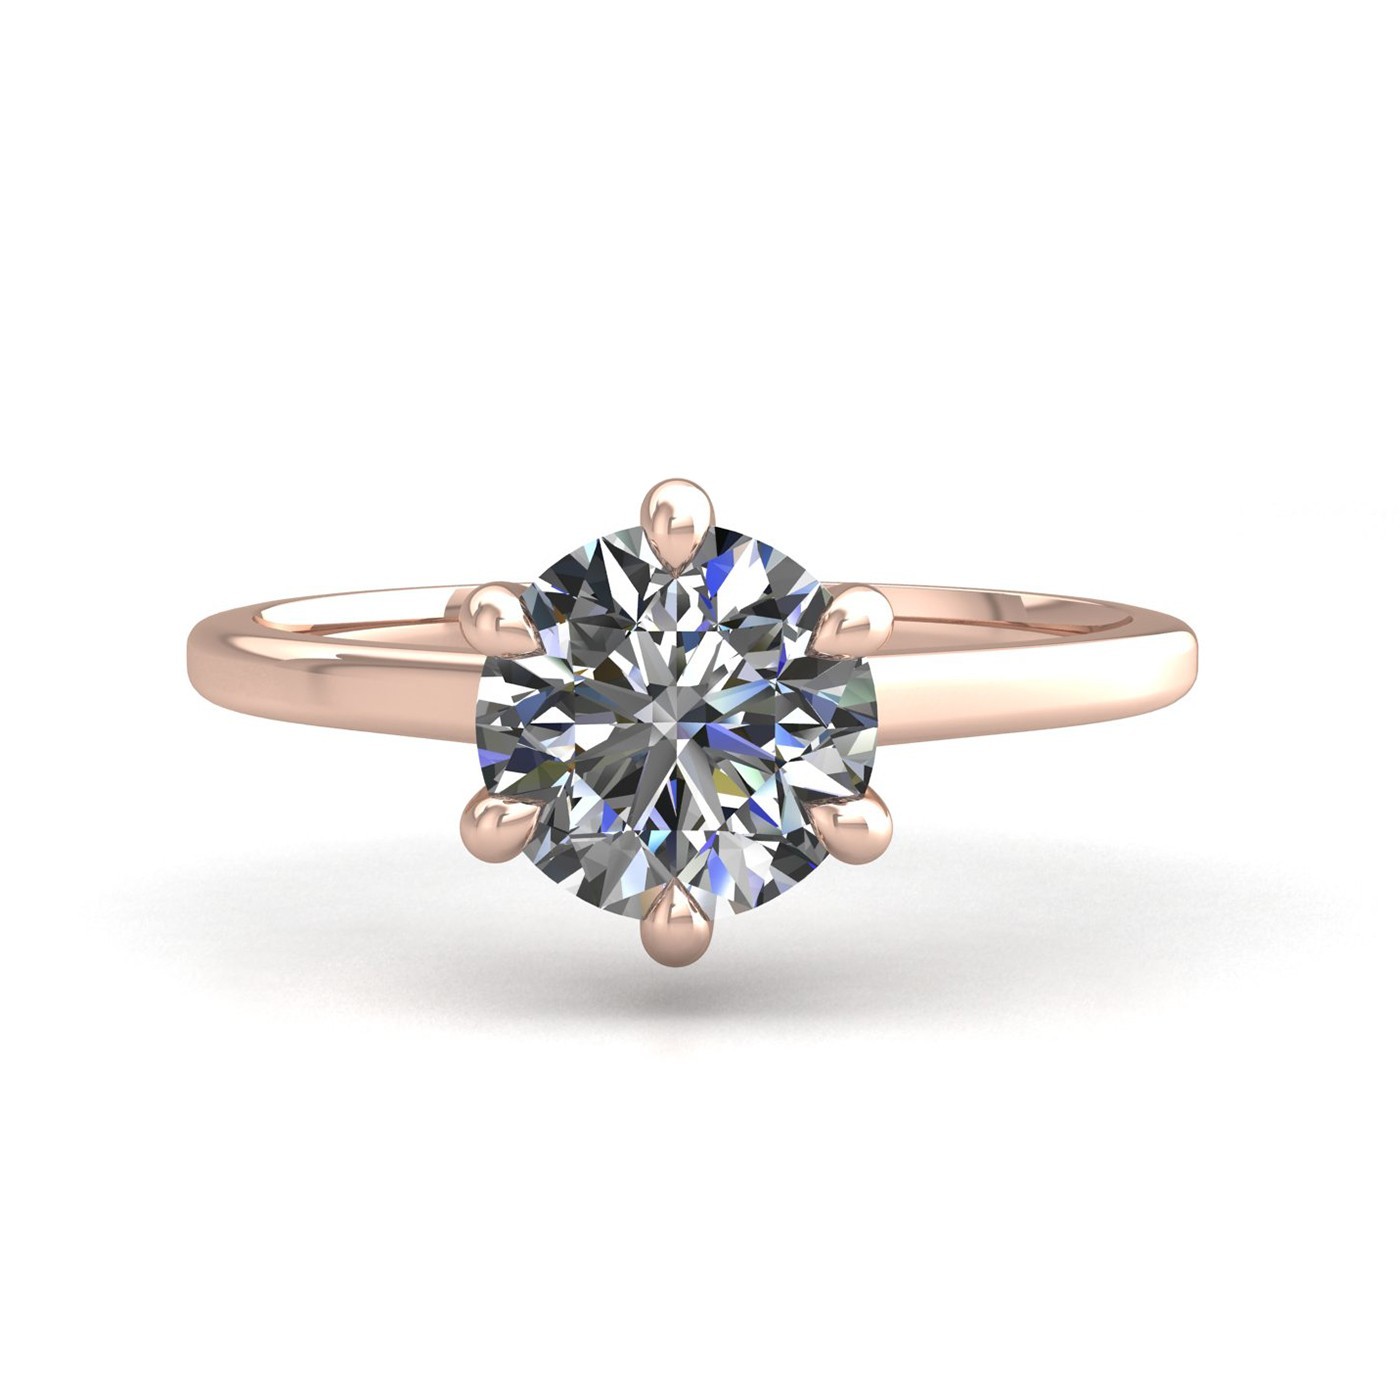 18k rose gold 2,50 ct 6 prongs solitaire round cut diamond engagement ring with whisper thin band Photos & images